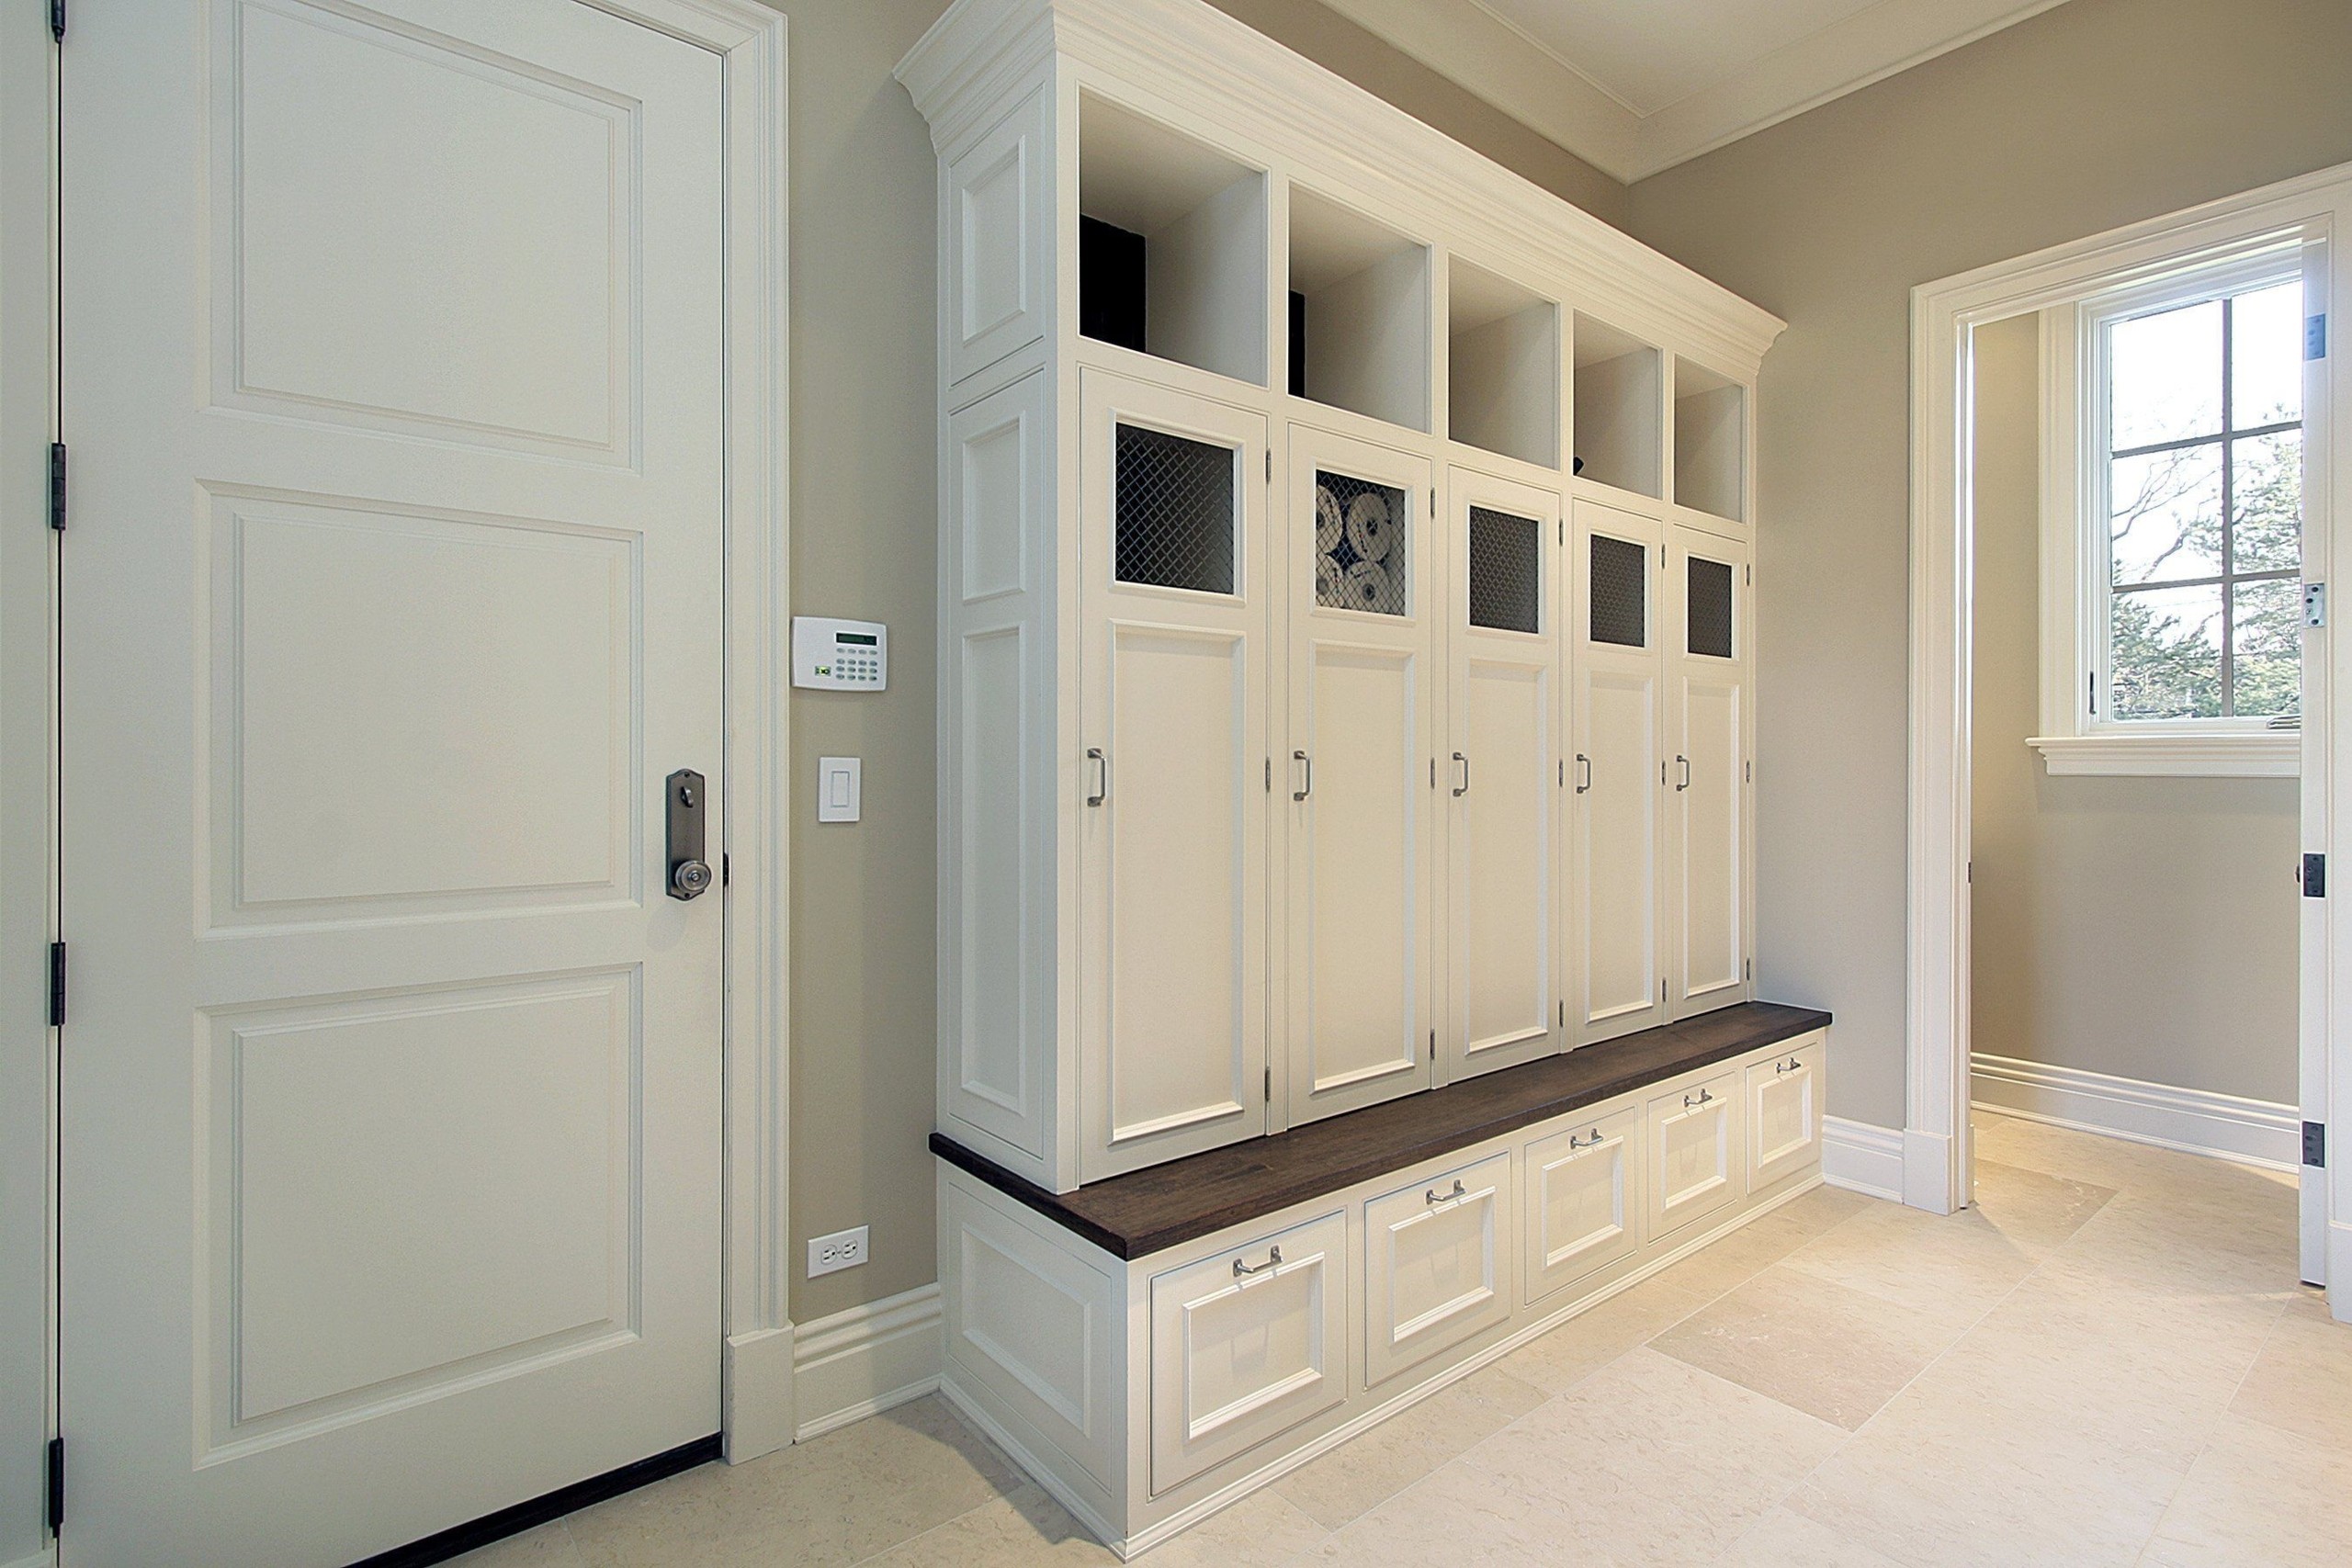 Built in storage cabinets with doors